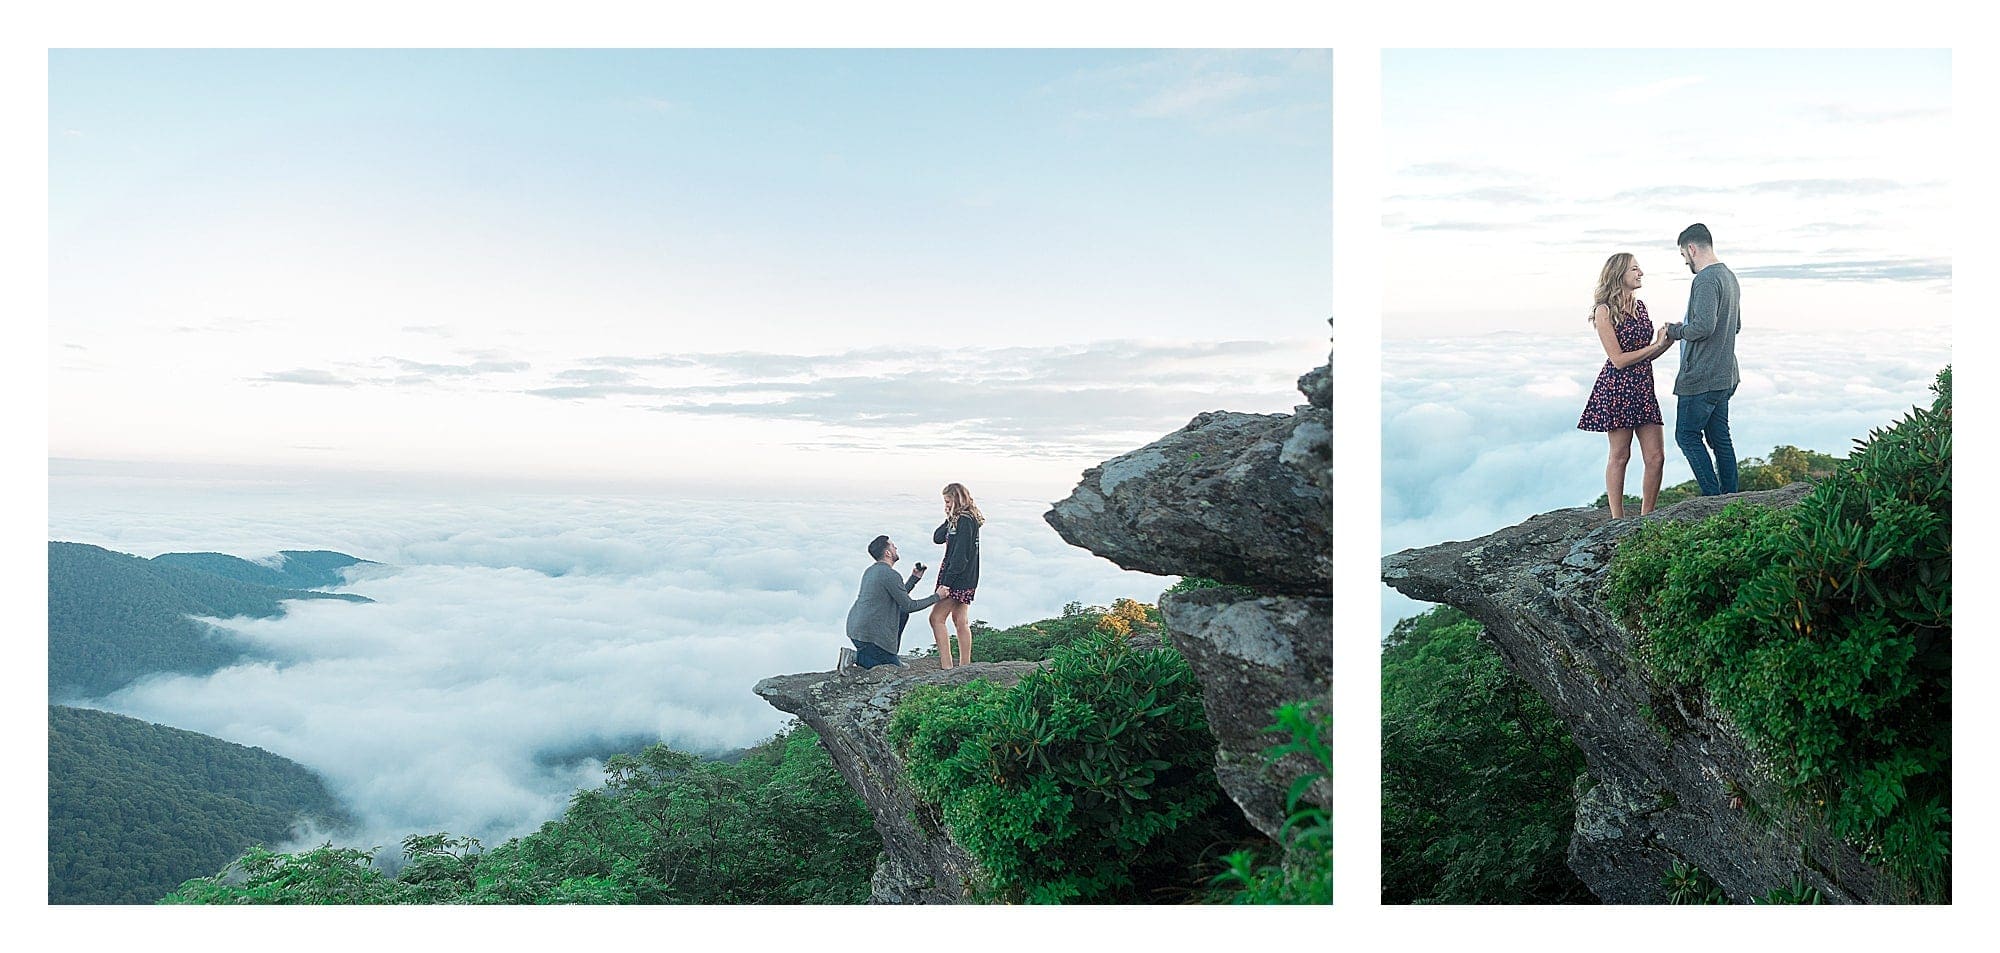 Man proposing to woman on top of mountains edge early morning